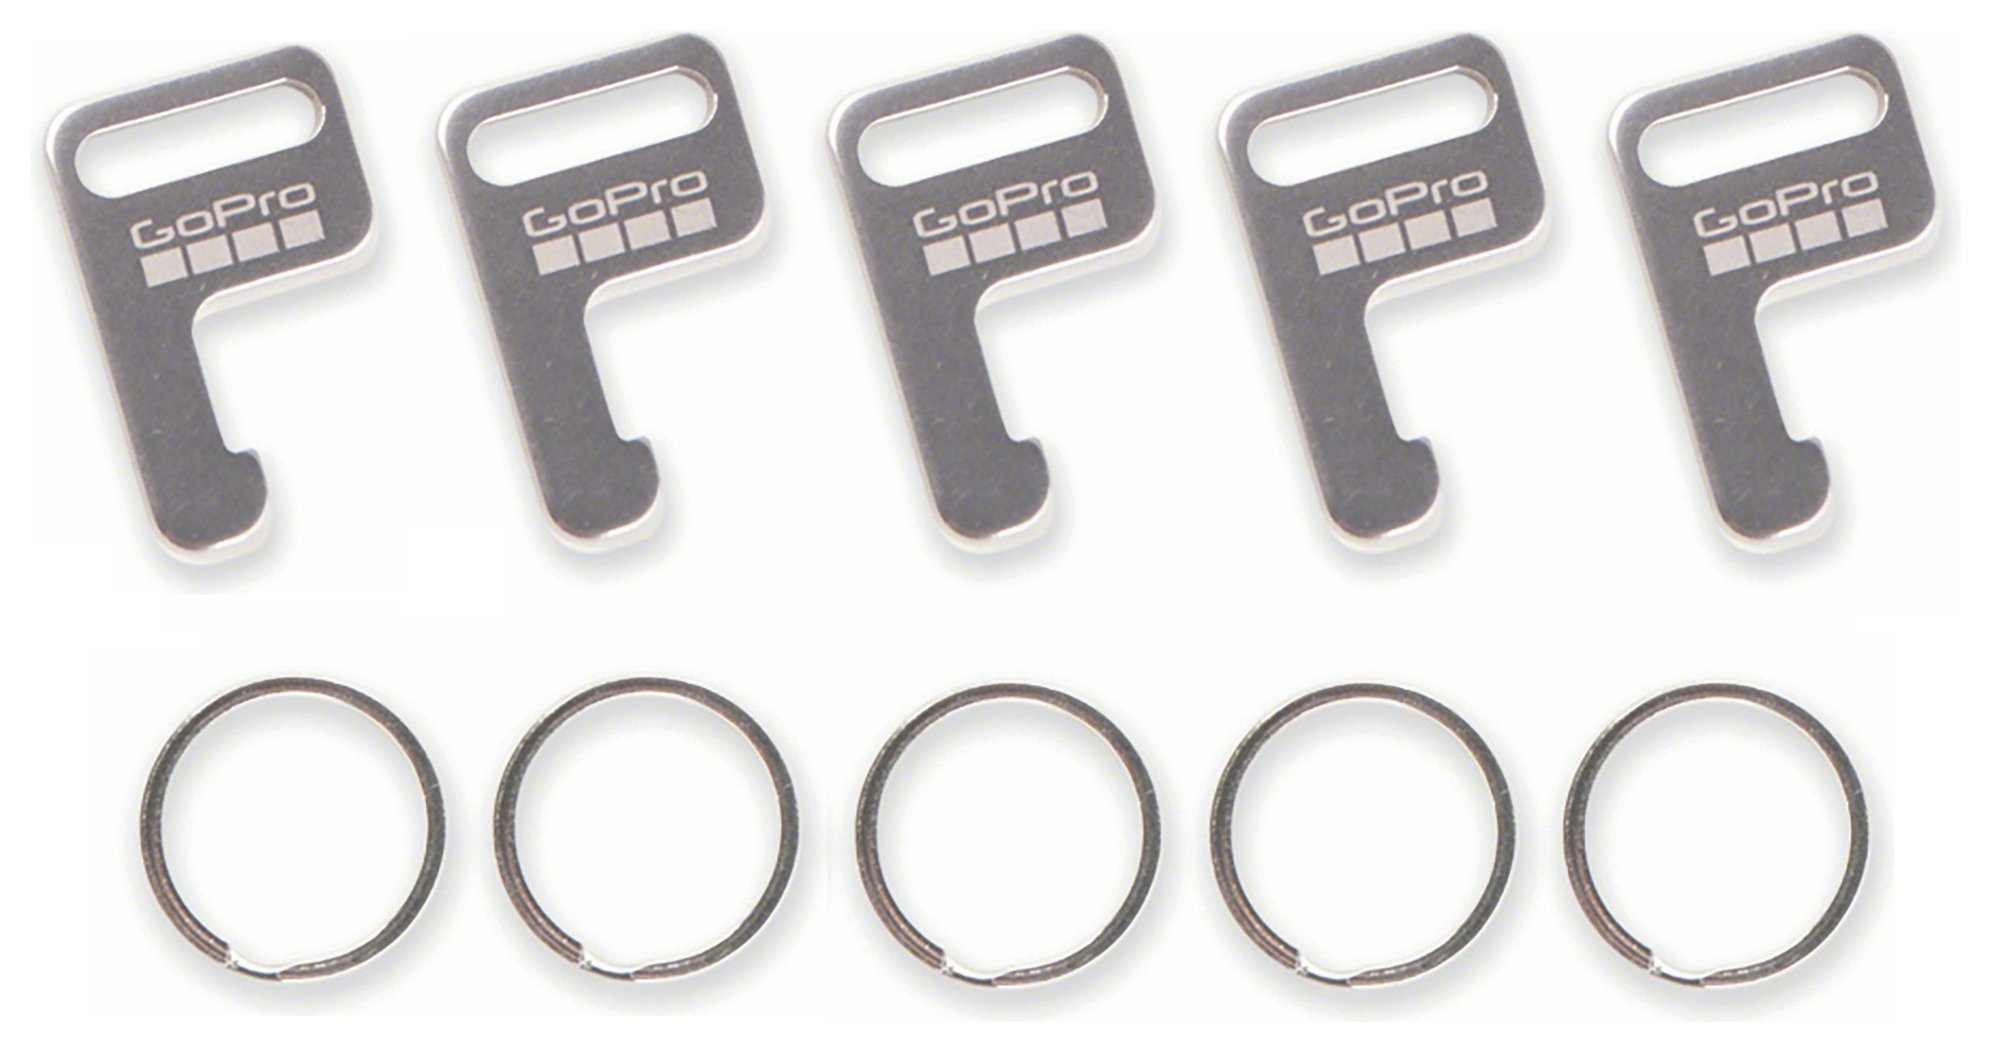 GoPro Smart Remote Keys and Rings